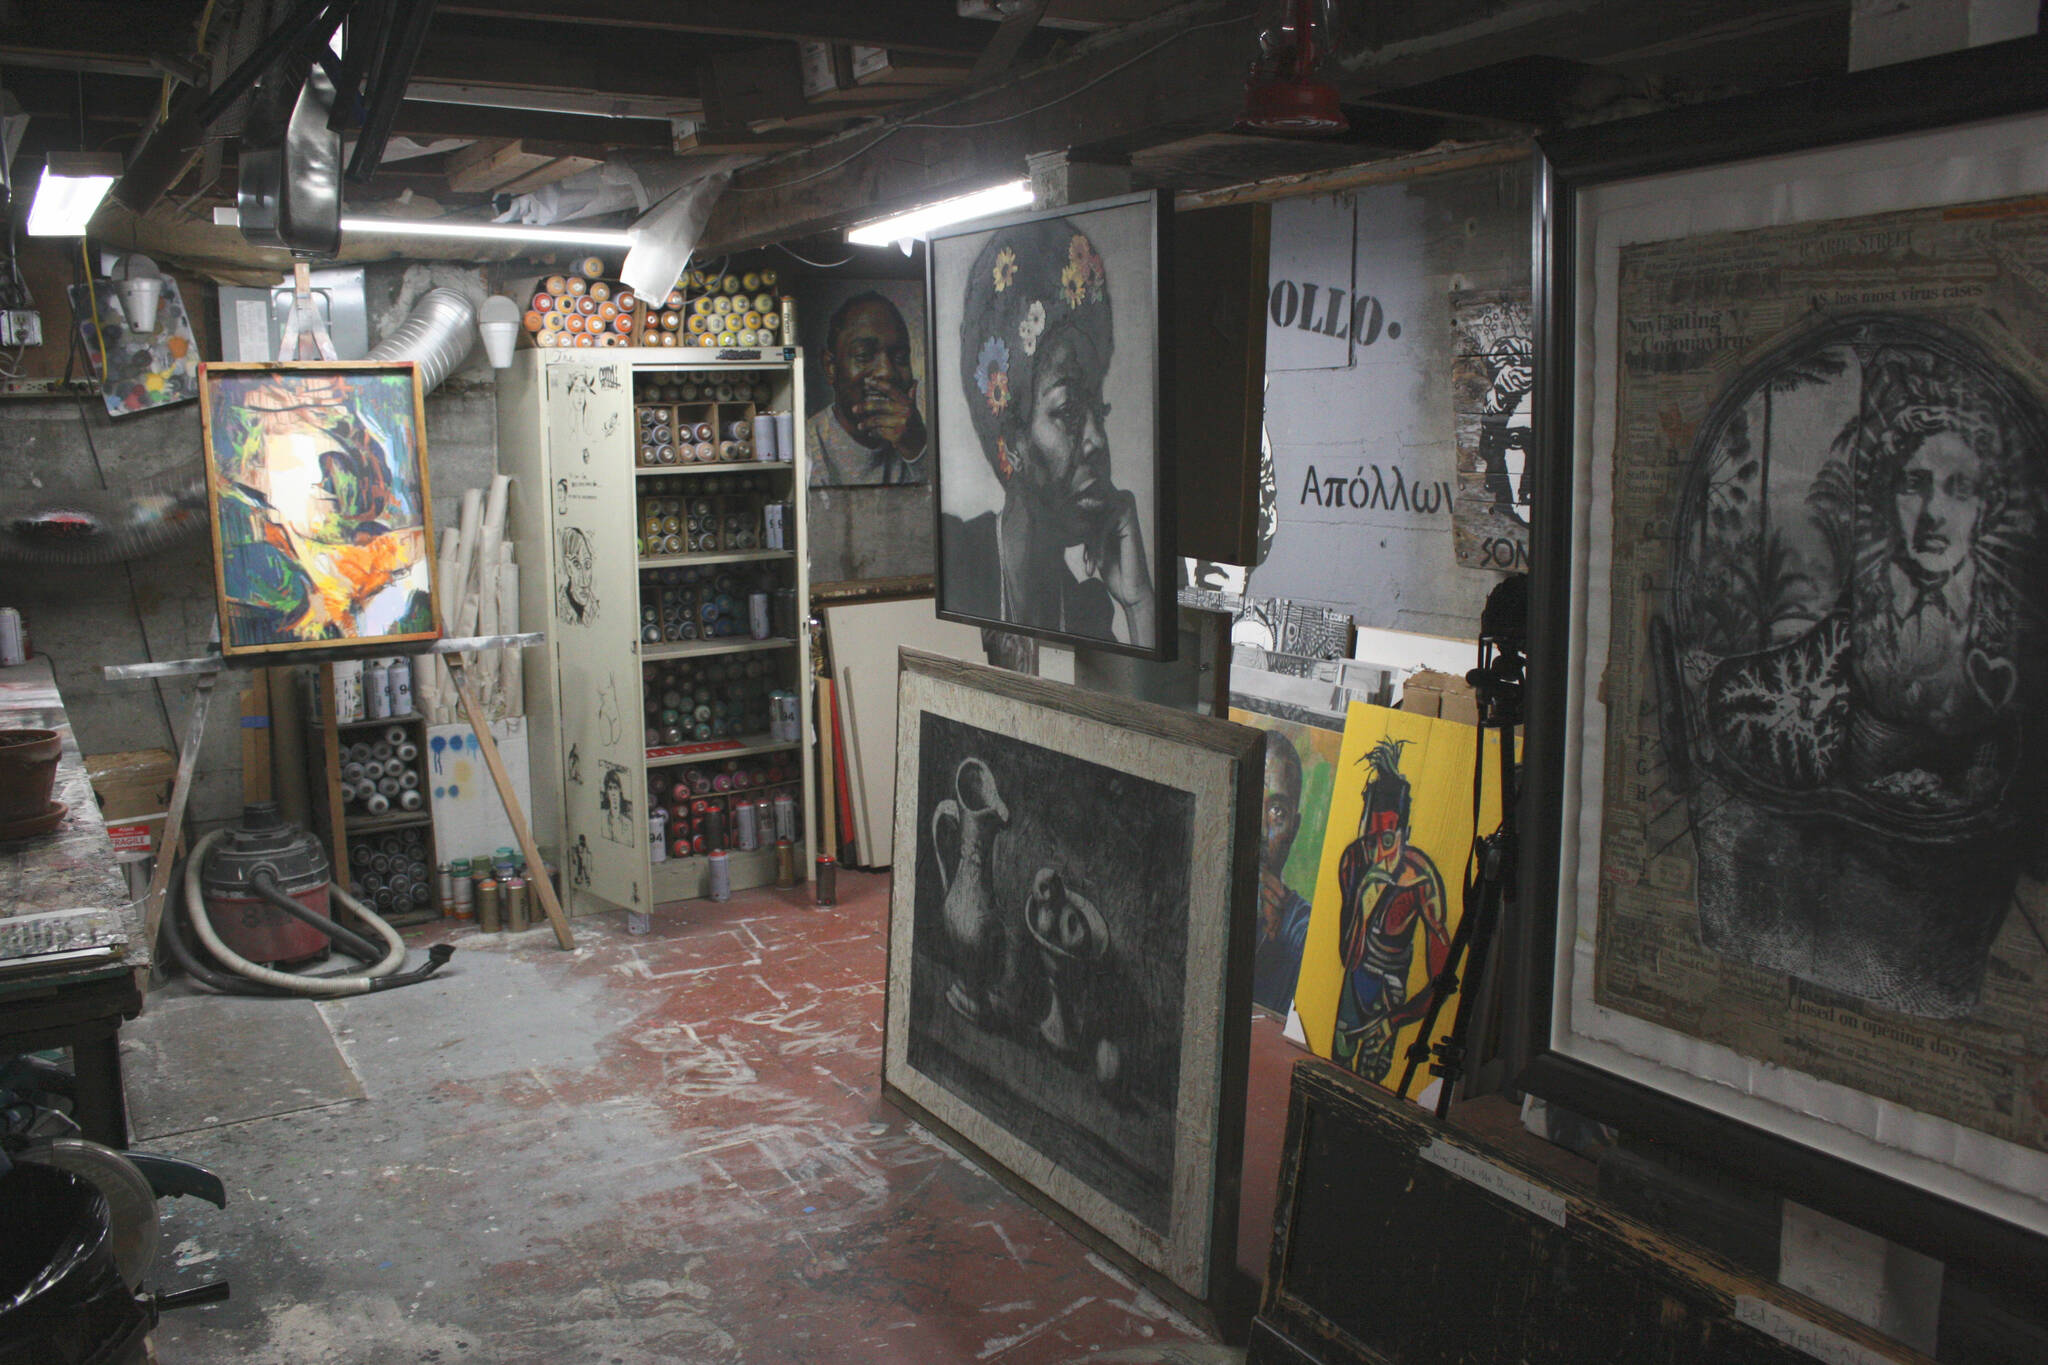 Codd’s basement studio filled with pieces he has created (photo by Cameron Sheppard)